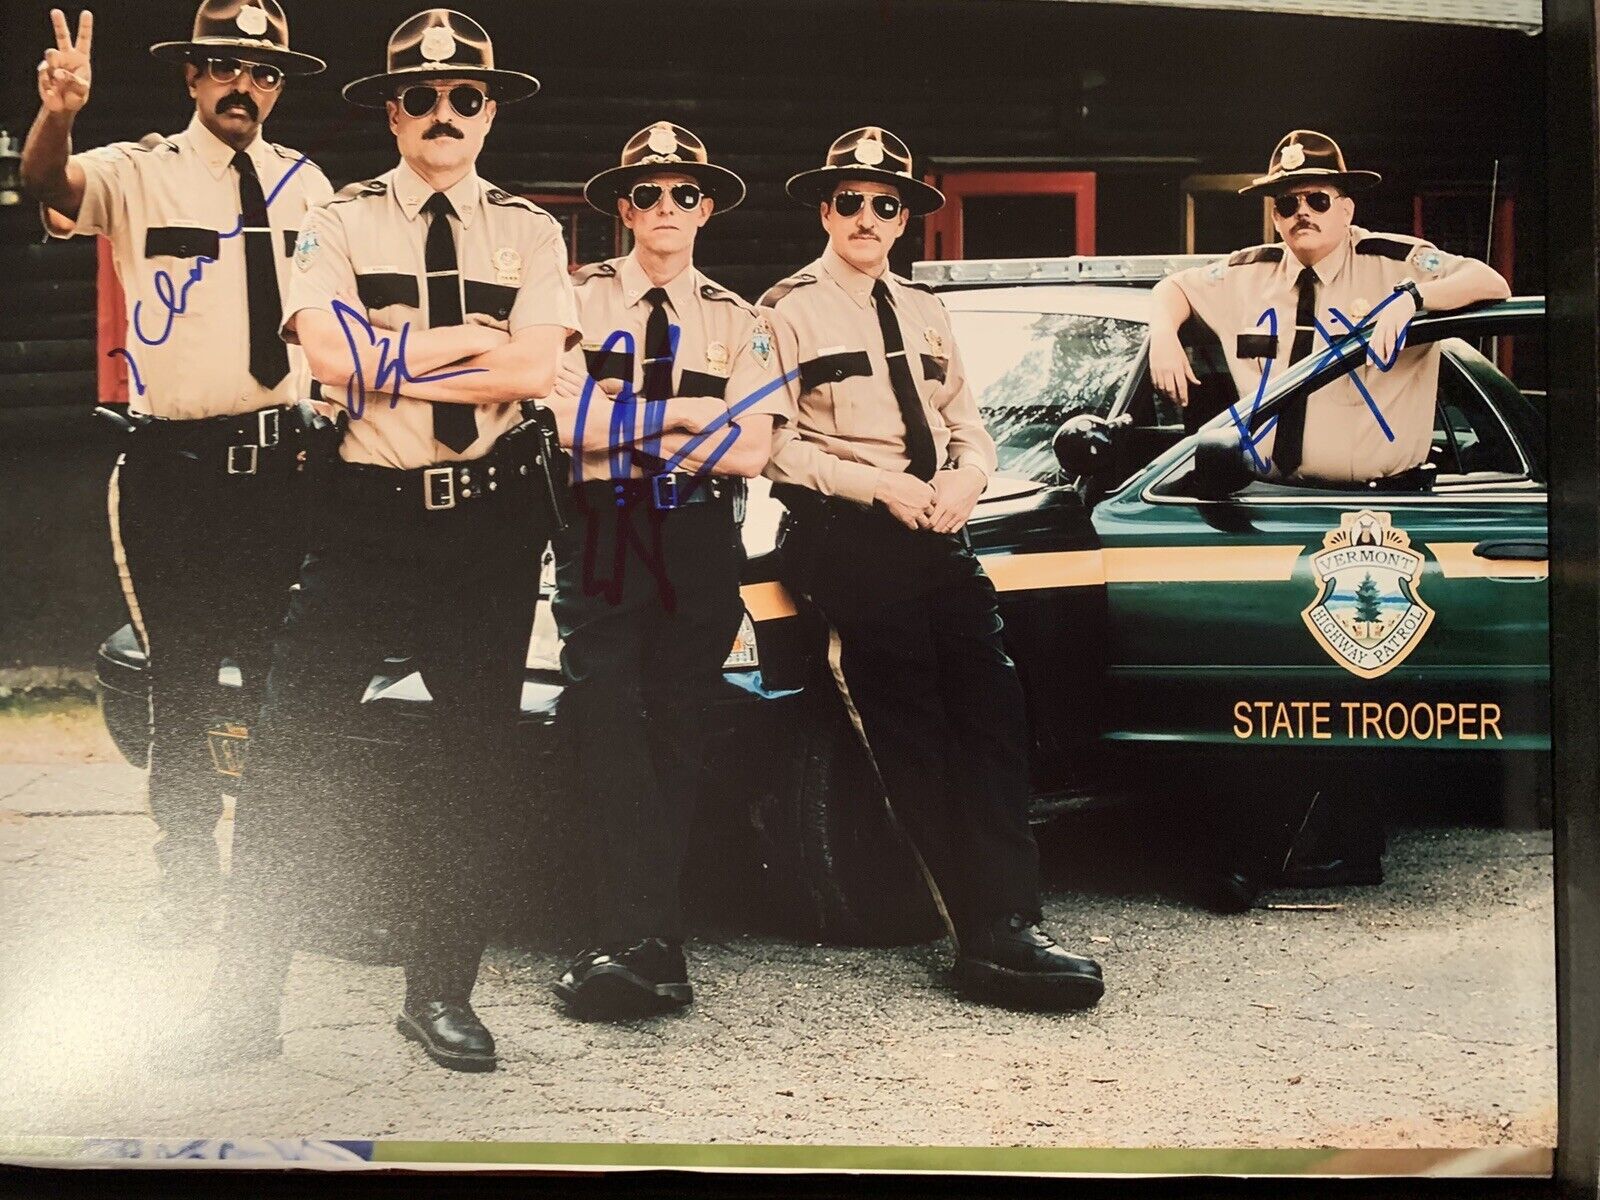 Super Troopers Signed 11x14 Photo Poster painting Pic Auto